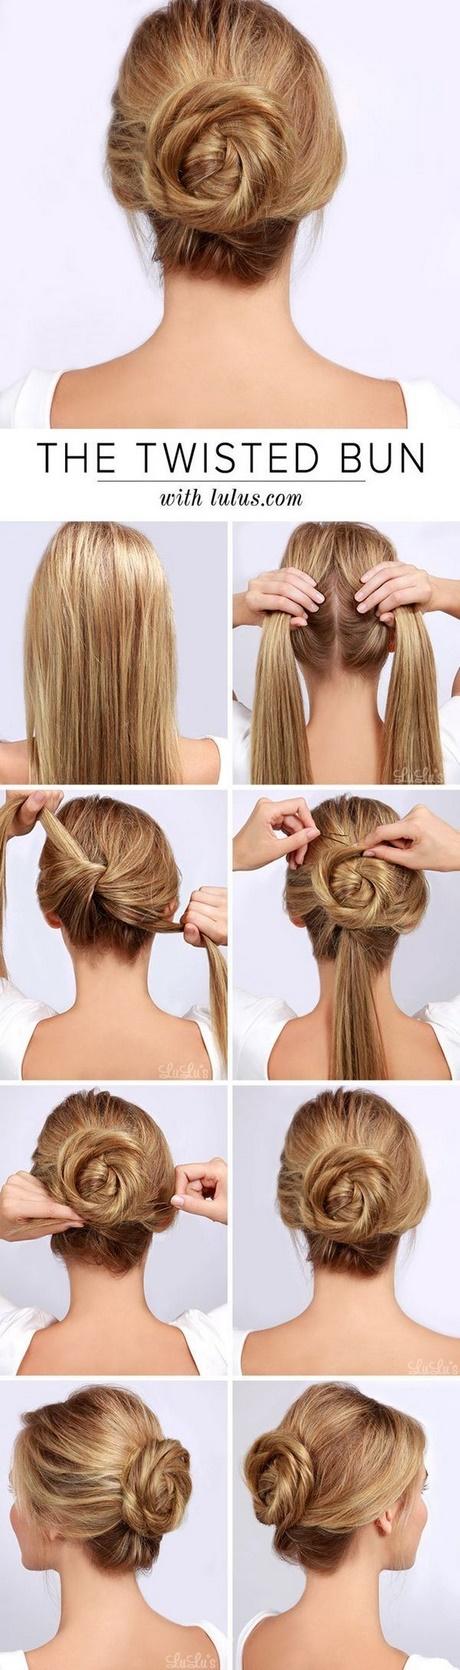 Simple hair updos for everyday simple-hair-updos-for-everyday-05_18